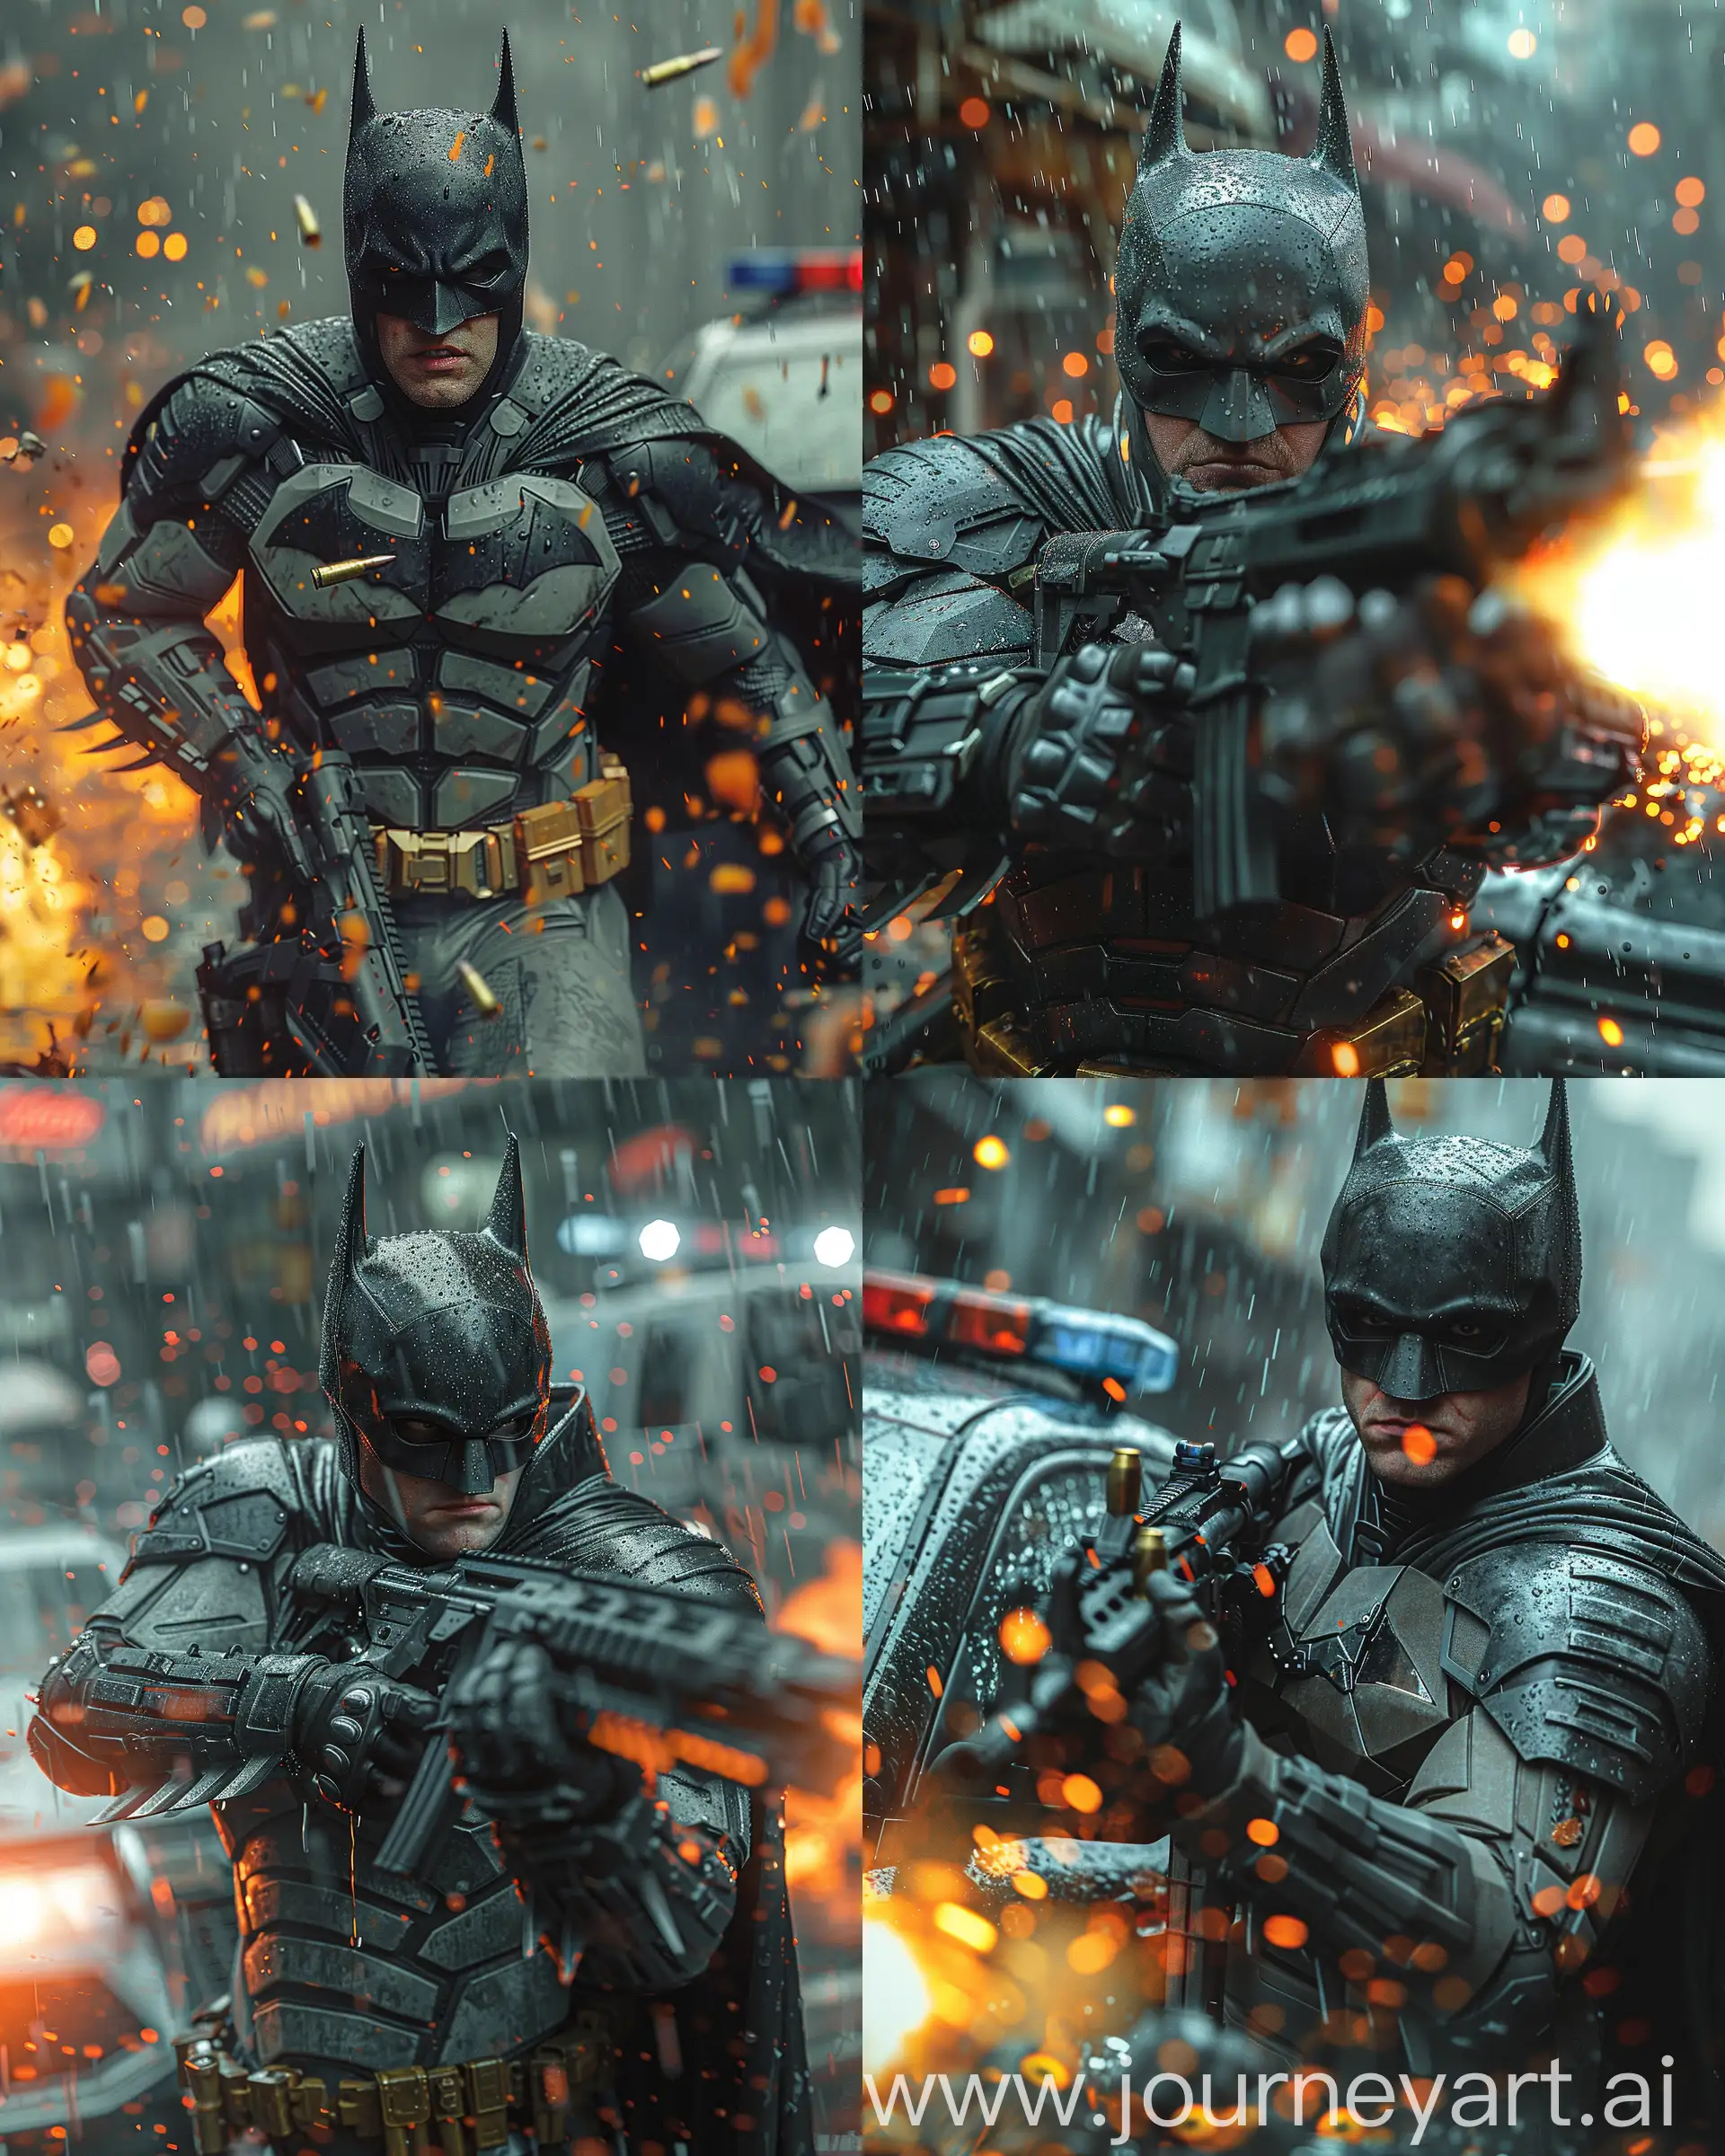 Hyperrealism Futuristic sci-fi high-tech An individual donned in the guise of Batman, inspired by the aesthetics of the Call of Duty game, adorned with an array of weaponry and ammunition, clad in a ballistic-resistant vest. This vigilante figure brandishes a formidable heavy automatic weapon, unleashing a torrent of firepower upon a police car, resulting in a spectacular explosion within an action-packed cinematic setting reminiscent of a high-budget film, glossy dripping wet body with heavy rain environment, sport photography, realistic perspective
 --stylize 750 --v 6.0 --style raw --ar 4:5